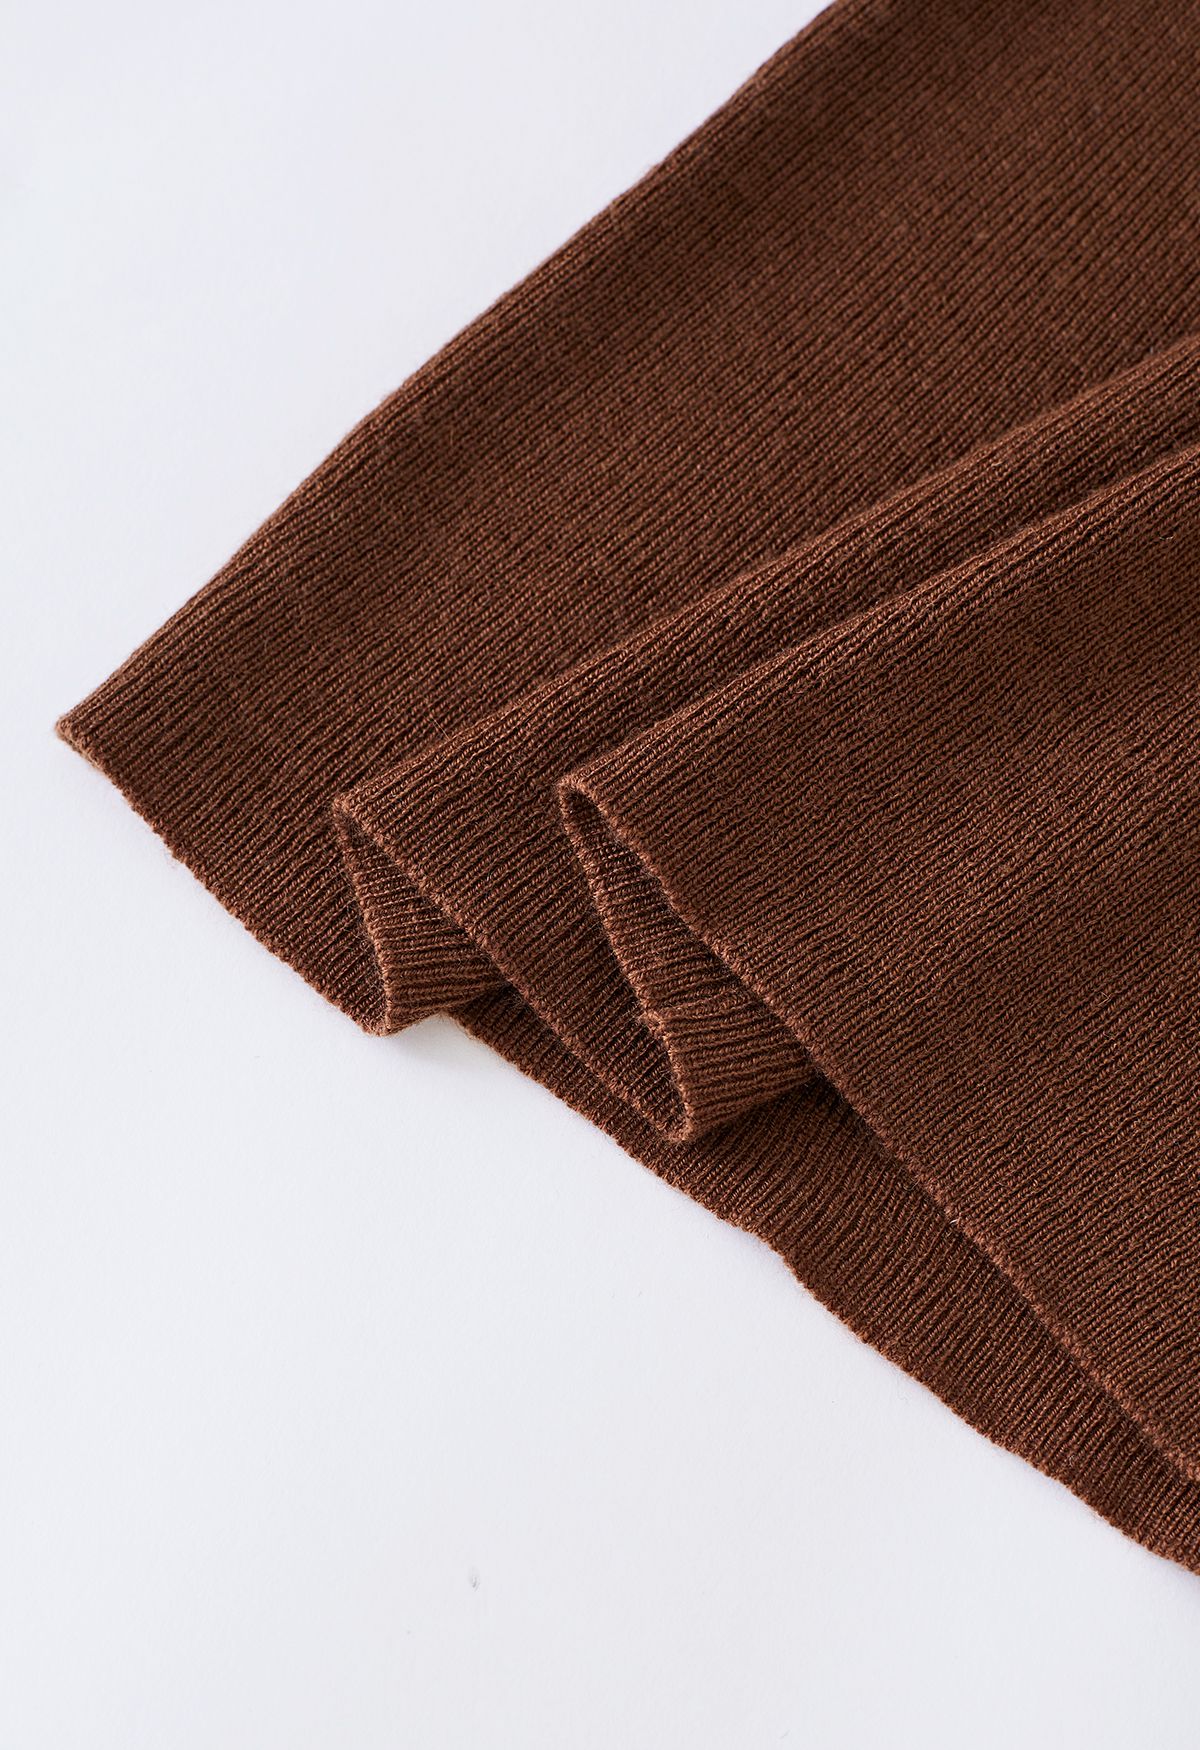 Turtleneck Two-Tone Fitted Knit Top in Brown